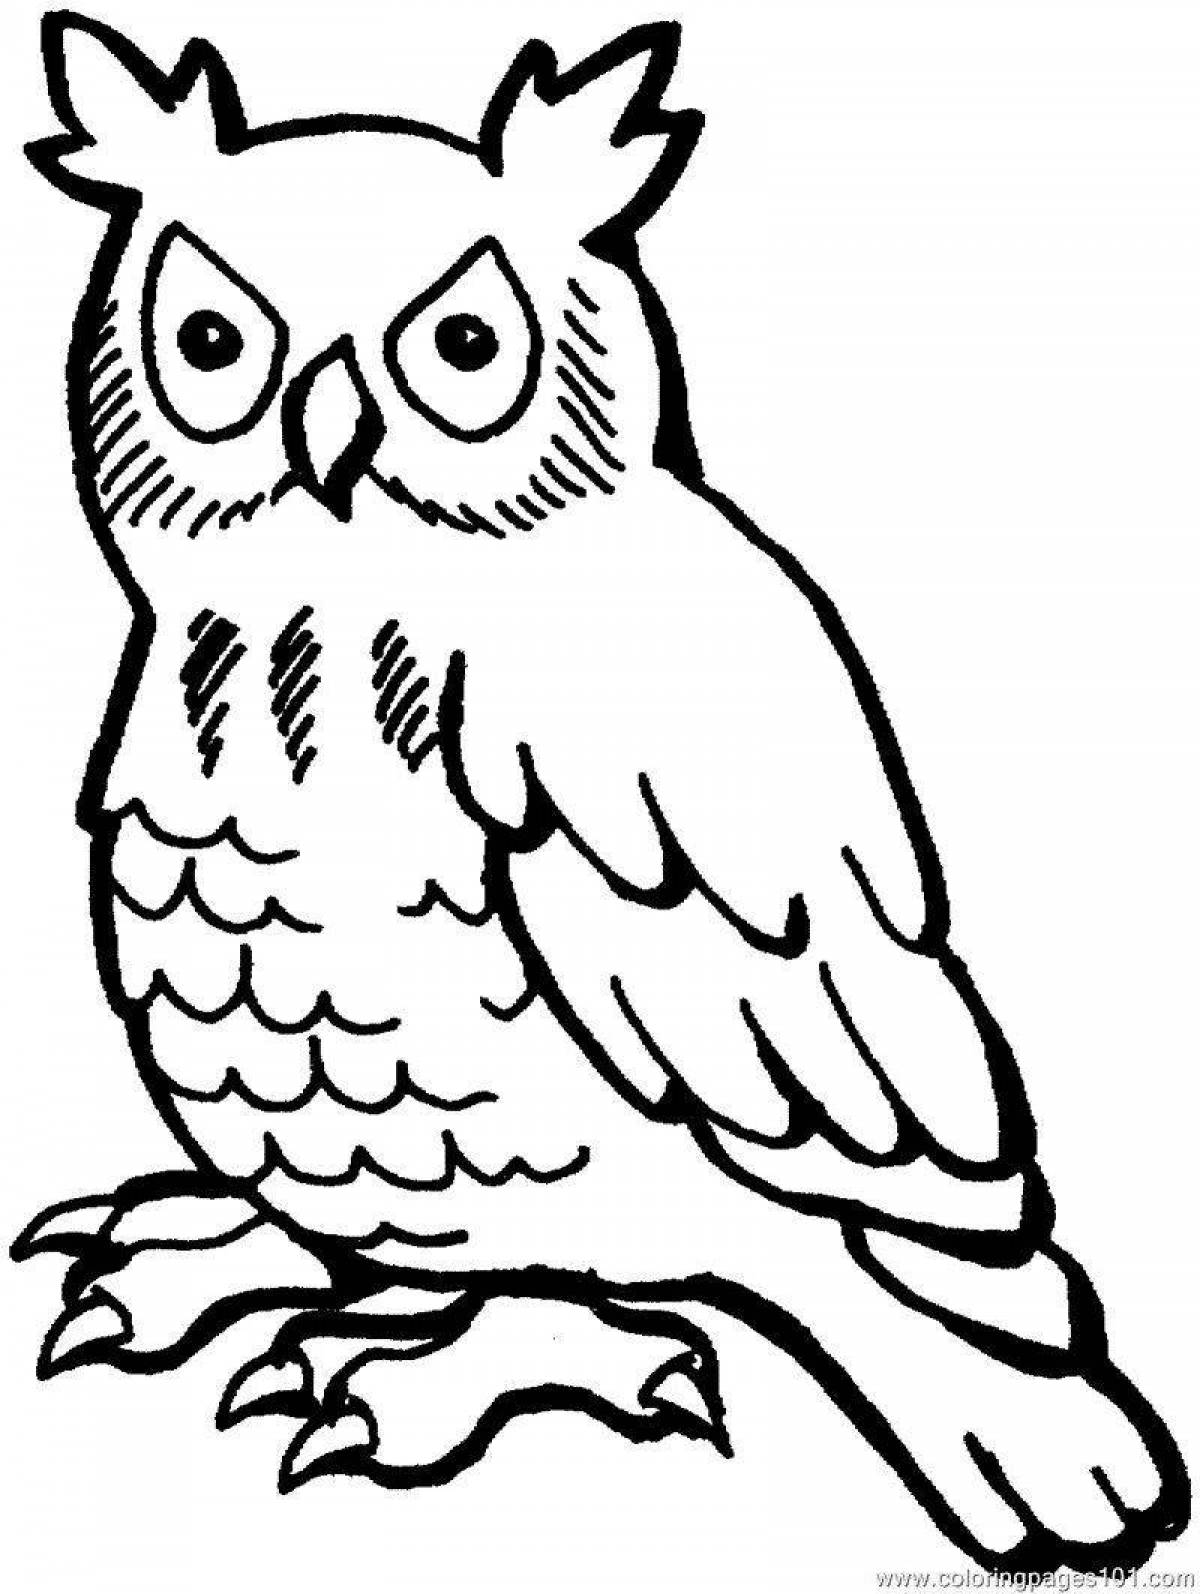 Unique long-eared owl coloring page